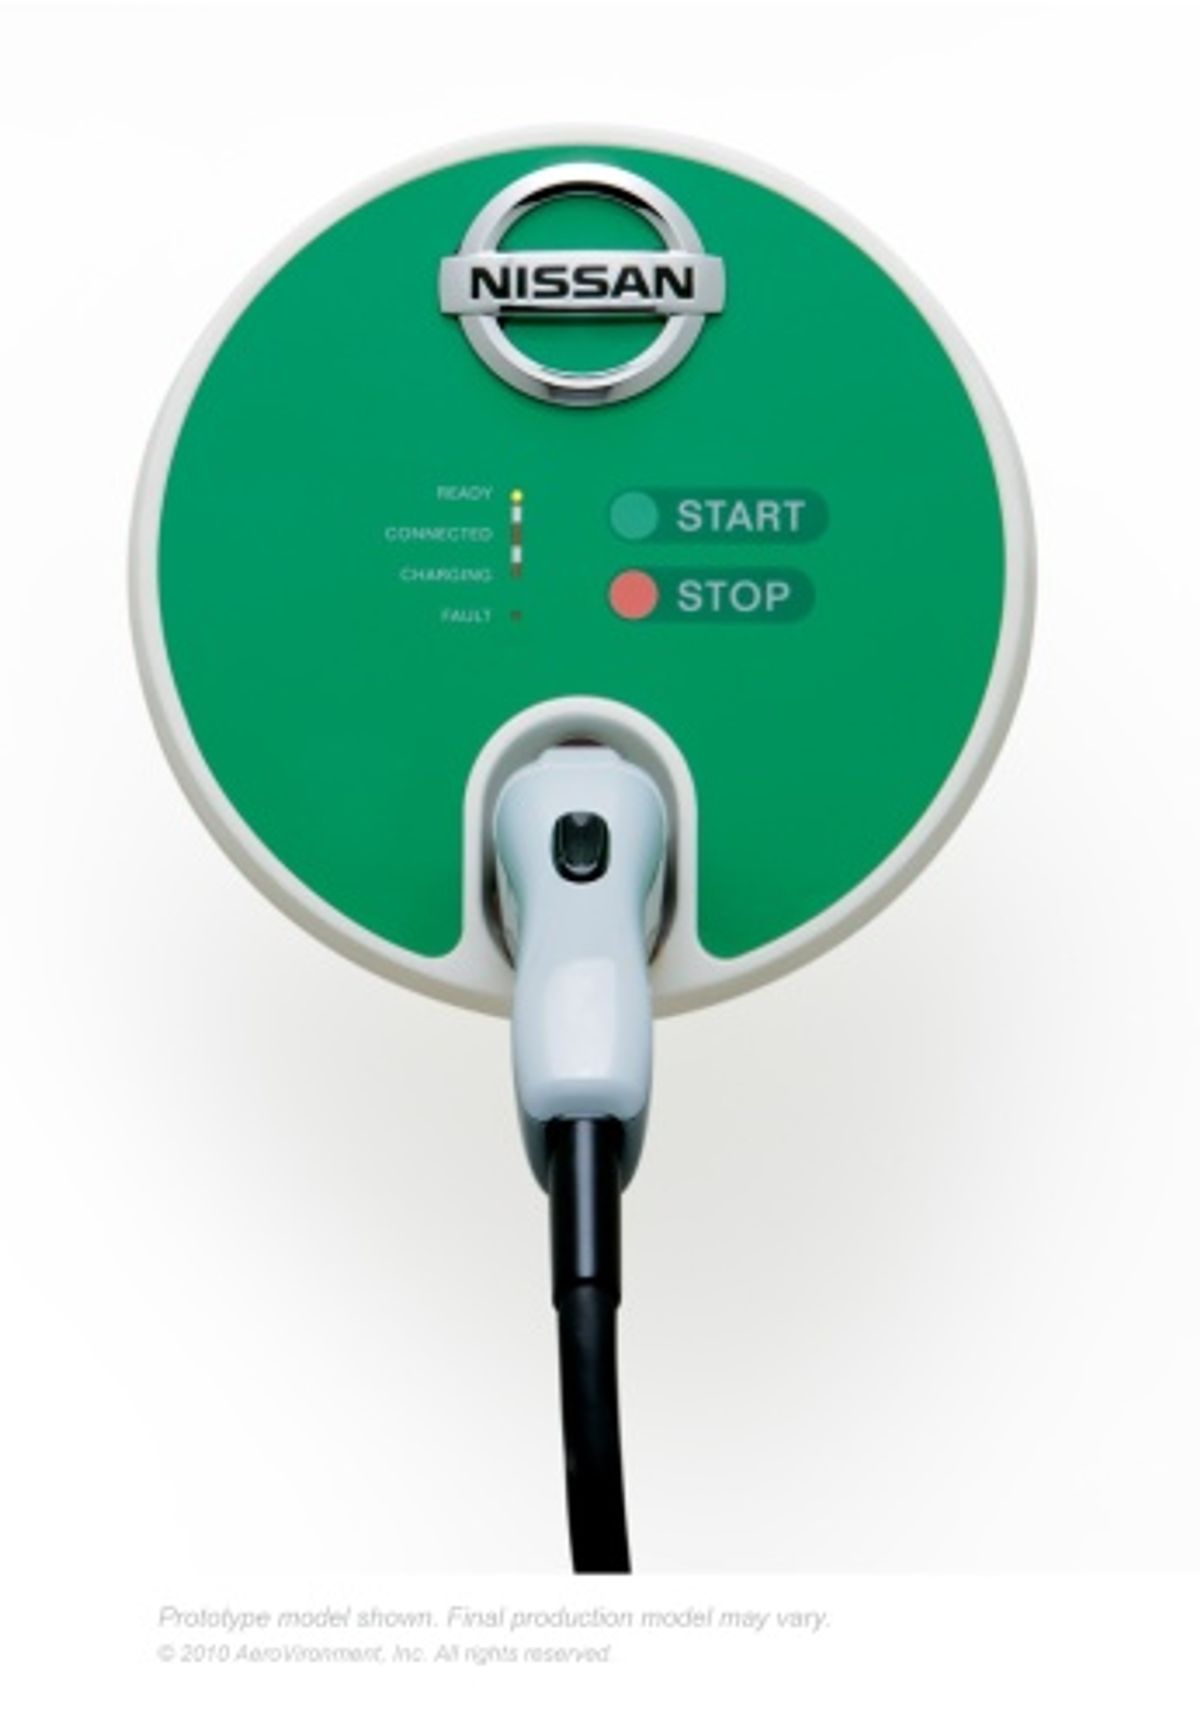 Nissan Gets Into the Electric Vehicle Charging Business